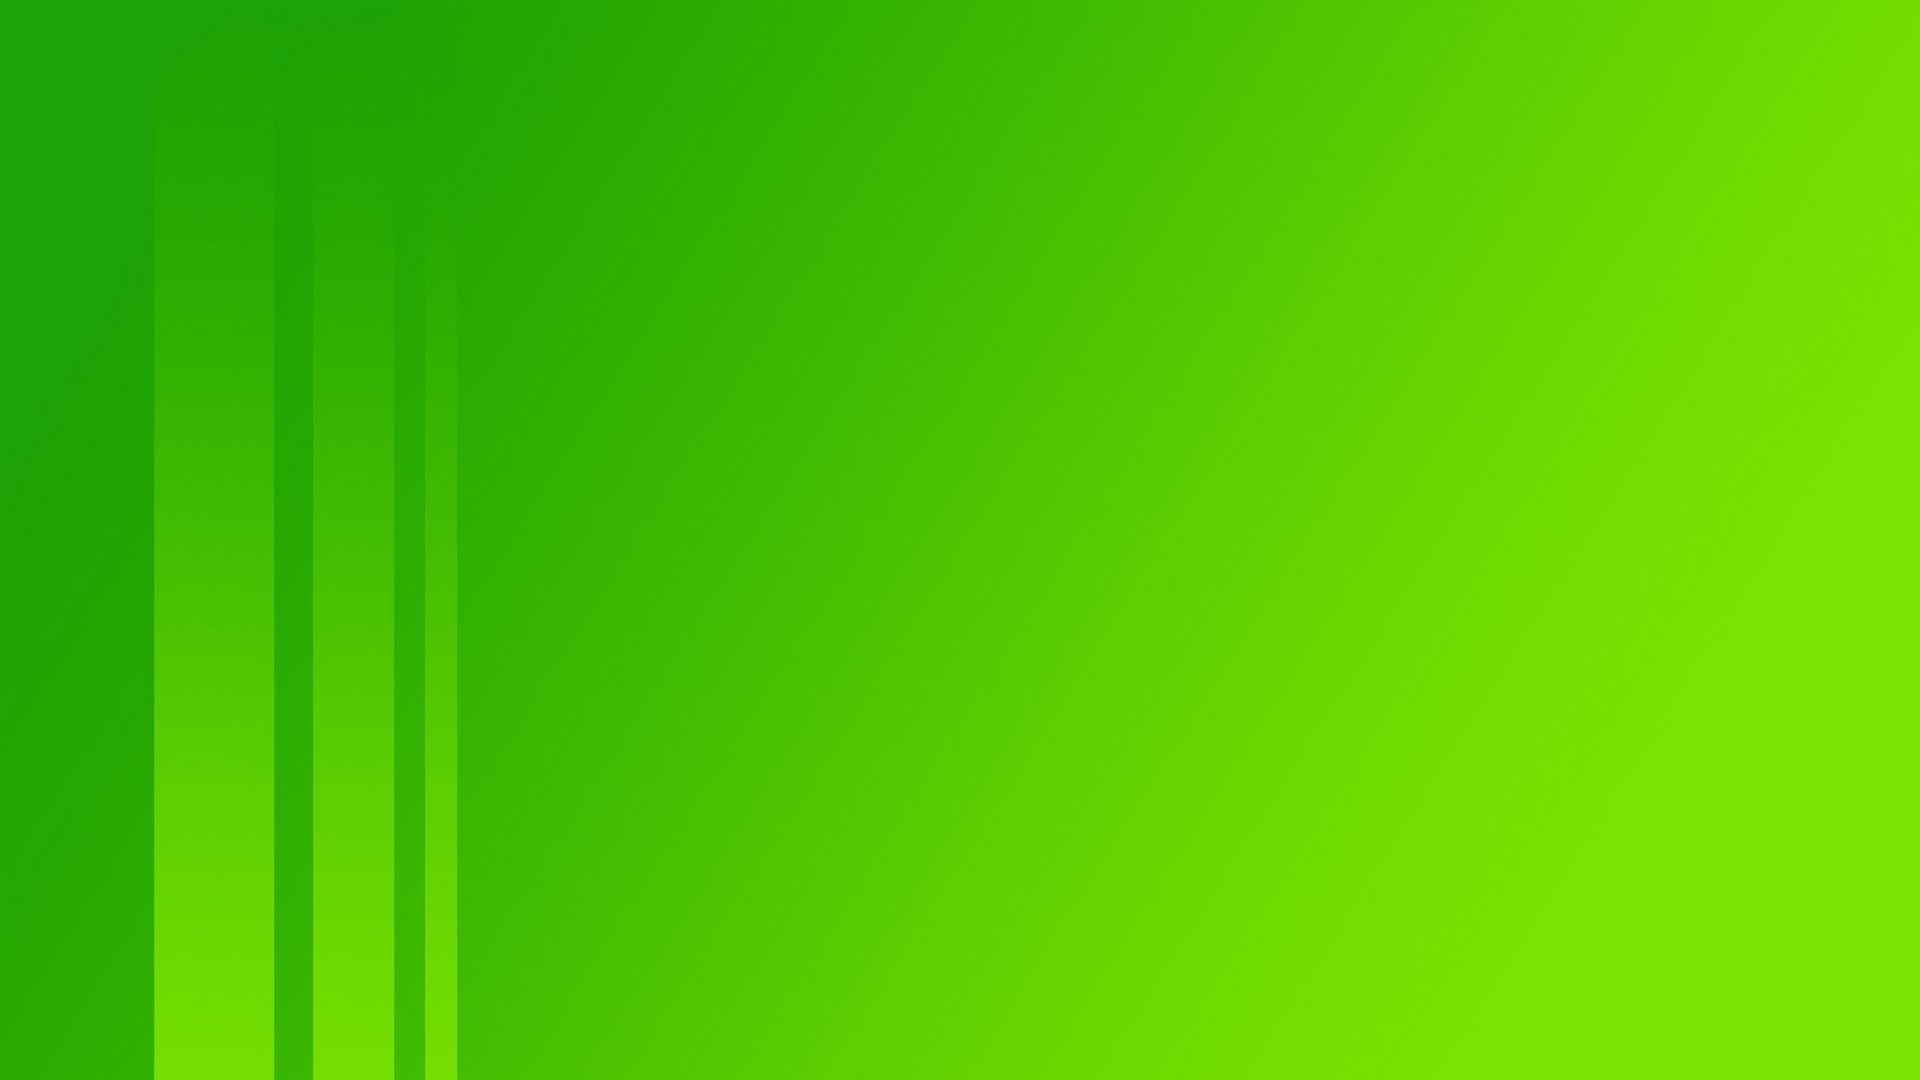 1920x1080 Solid Bright Green Background